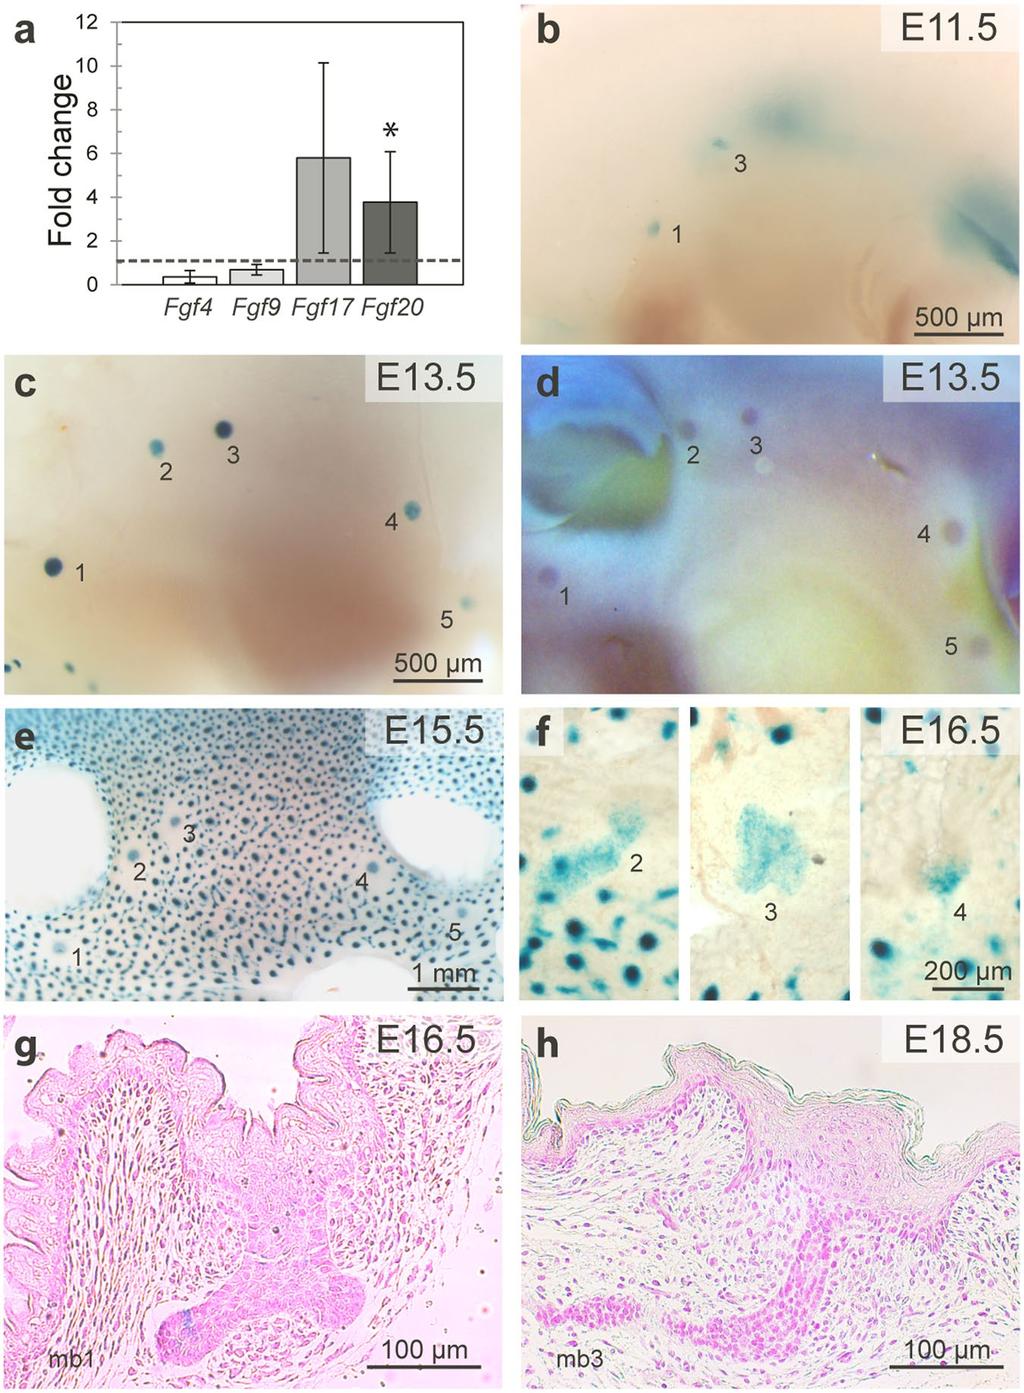 Figure 1. Fgf20 is induced by Eda and is expressed in embryonic mammary glands. (a) qrt-pcr analysis of Fgf4 (n = 4), Fgf 9 (n = 4), Fgf17 (n = 6) and Fgf20 (n = 7) expression in E13.